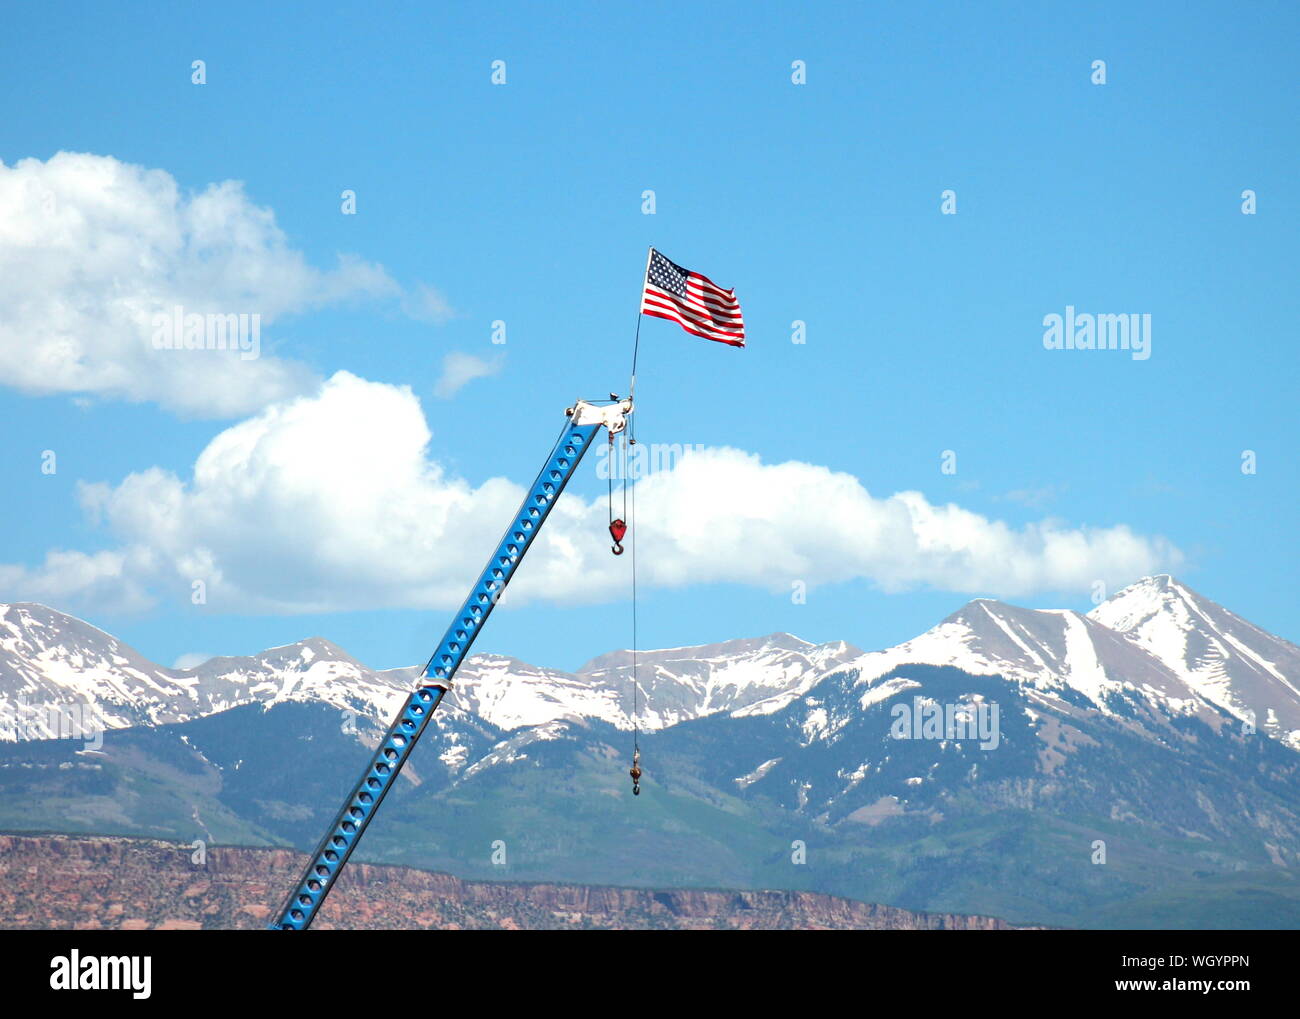 American Flag Waving On Crane Against Snowcapped Mountains Stock Photo